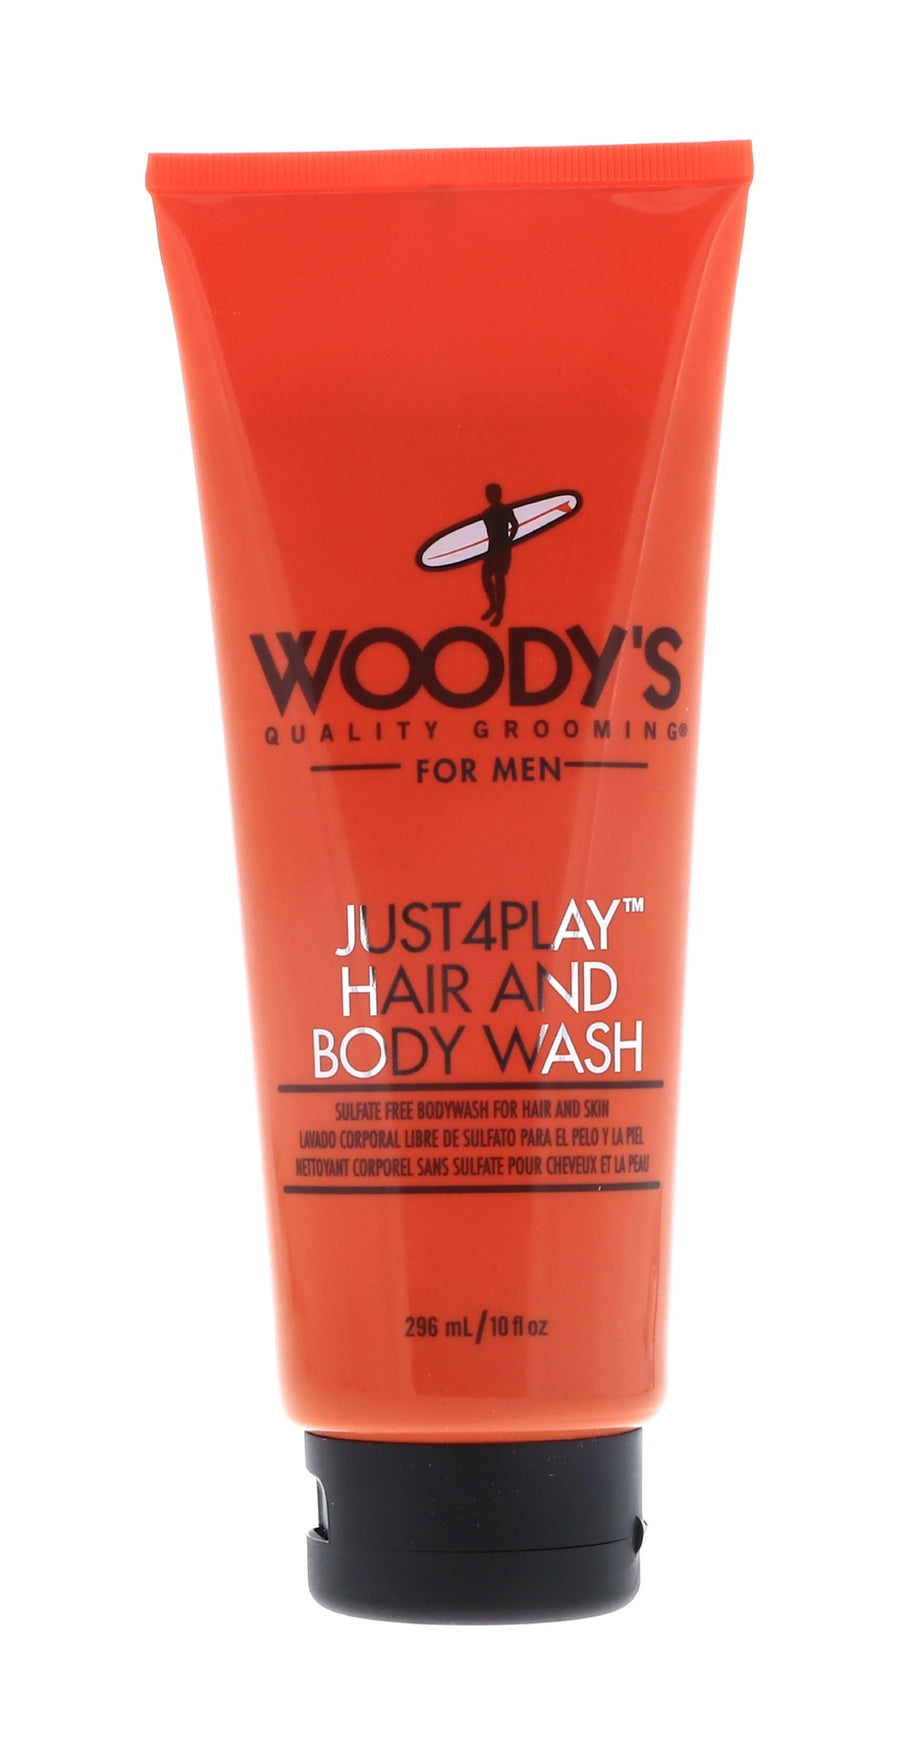 Woody's For Men Just4Play Hair and Body Wash 10 oz